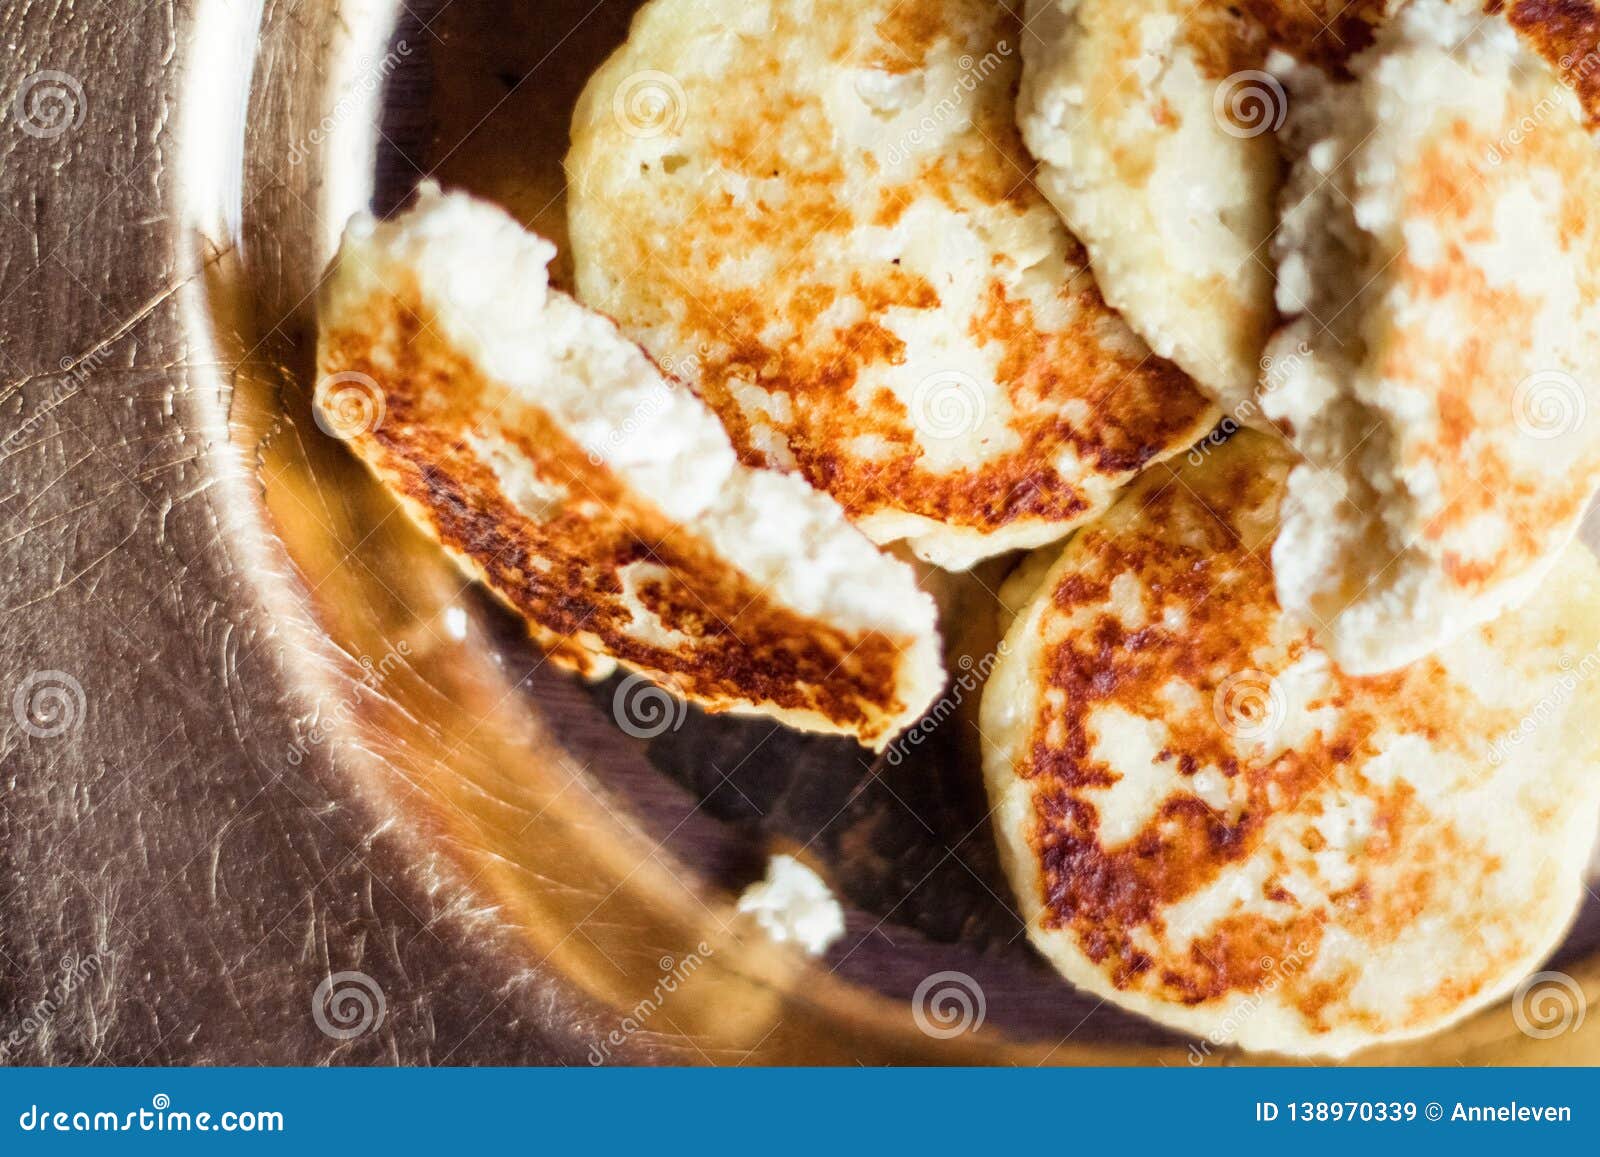 Your Favourite Homemade Breakfast Is Served Stock Image Image Of